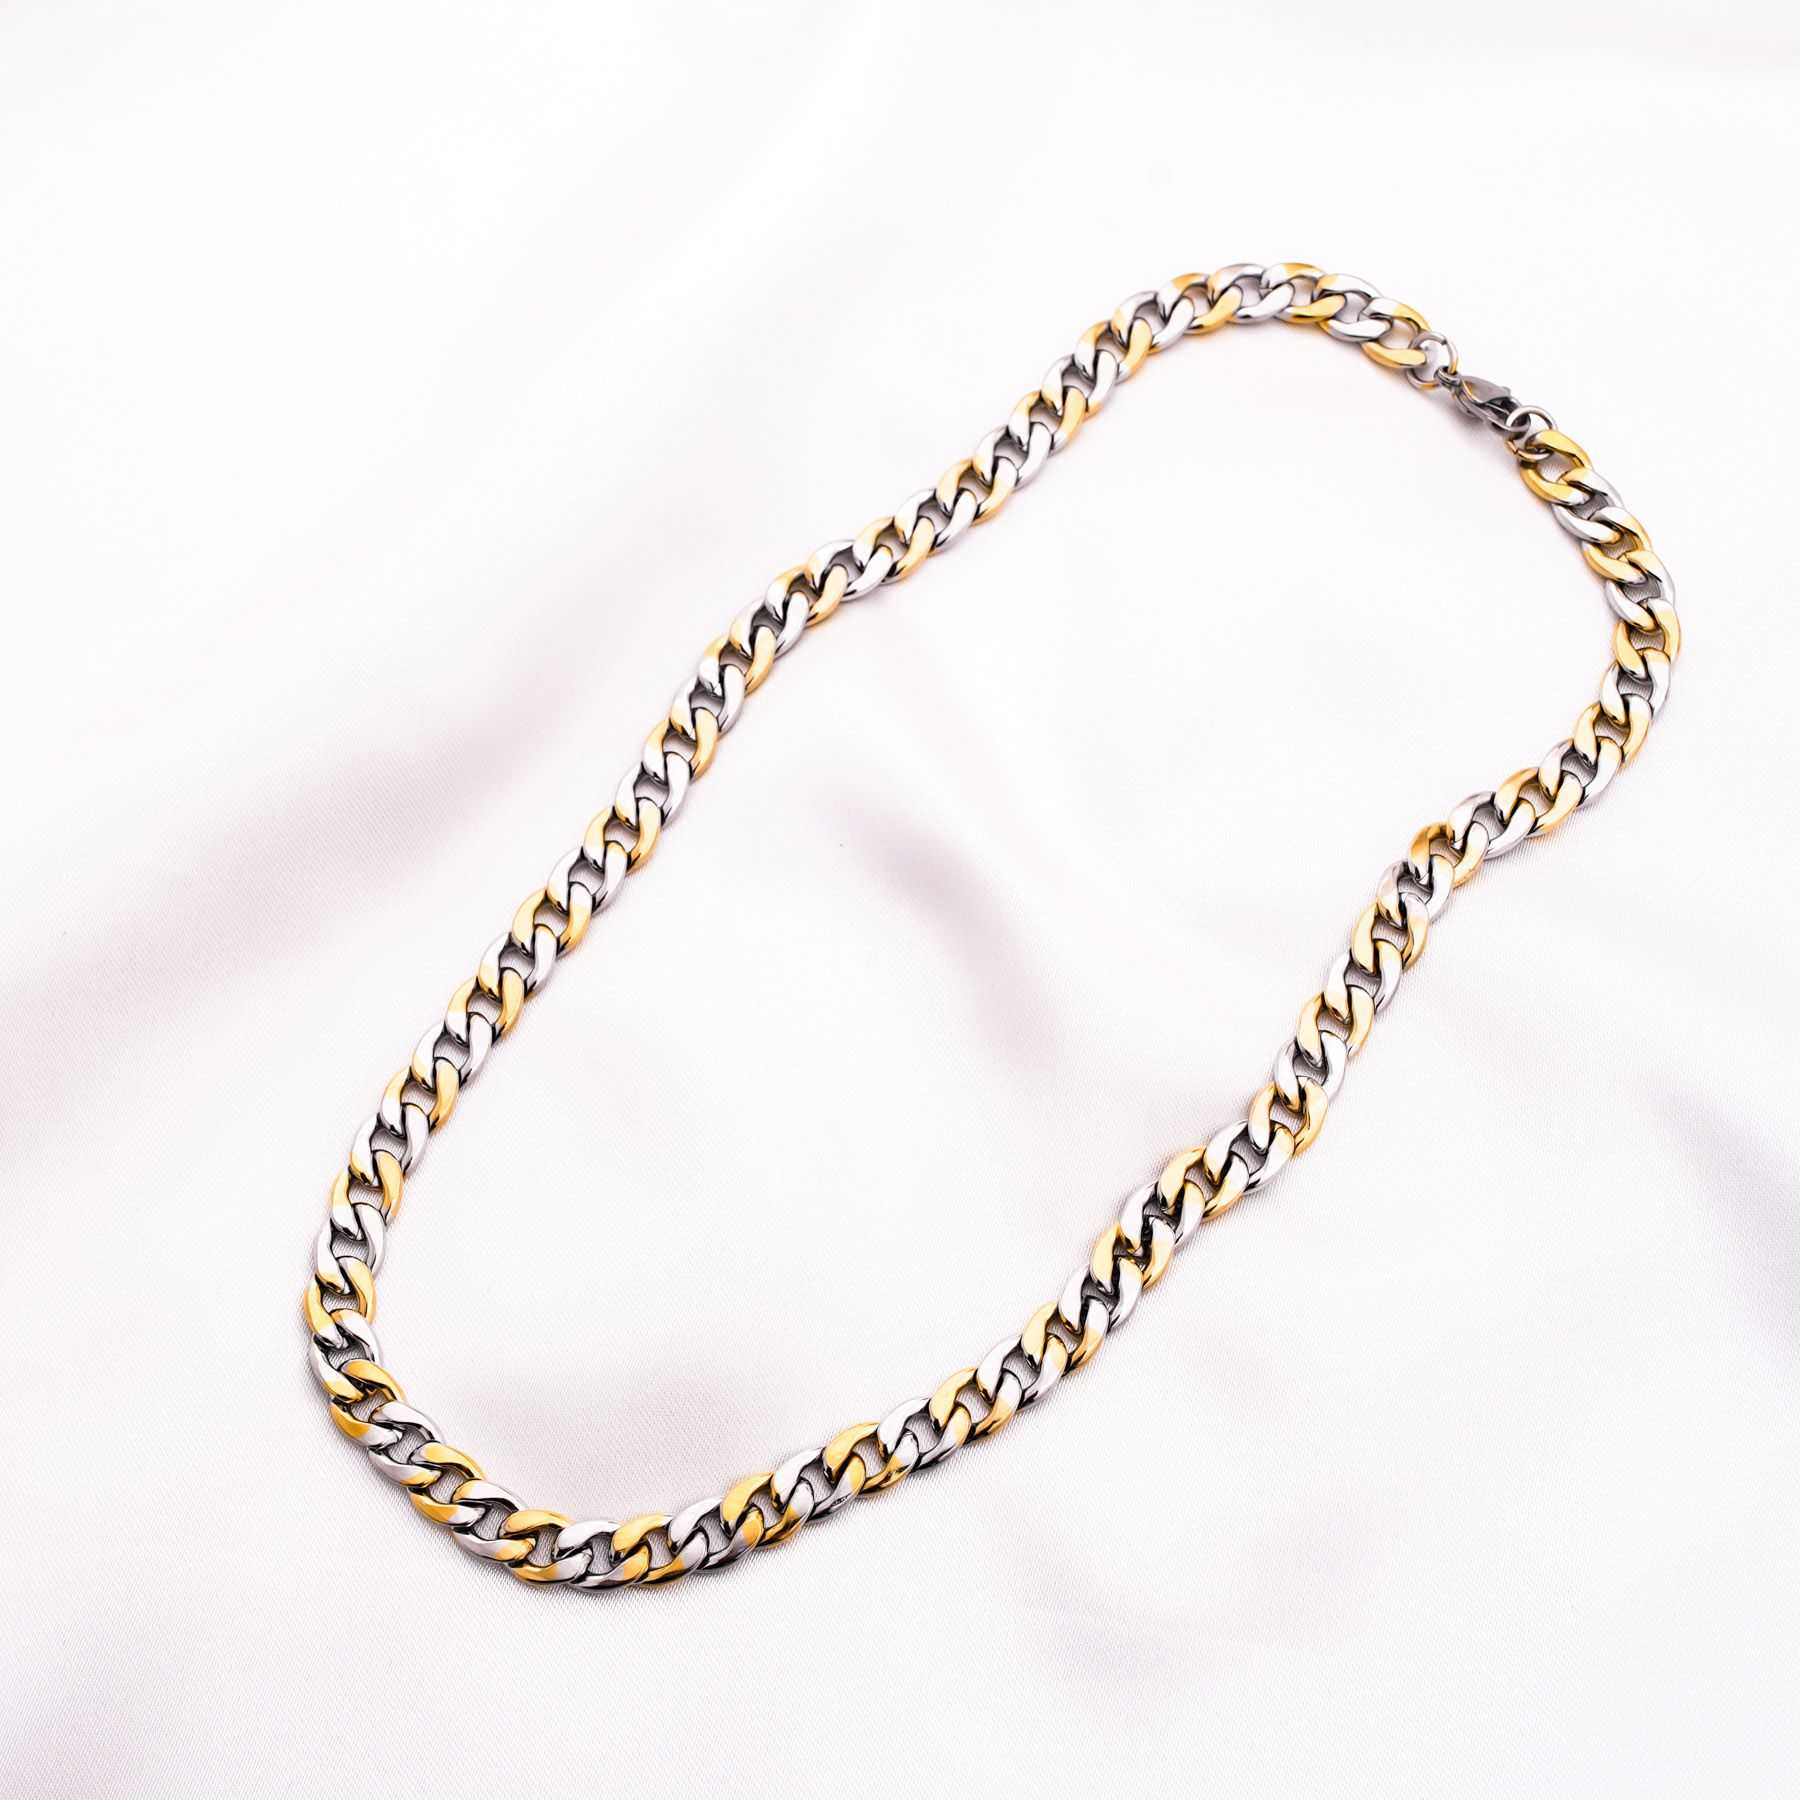 KYRA CHAIN NECKLACE - SILVER & GOLD